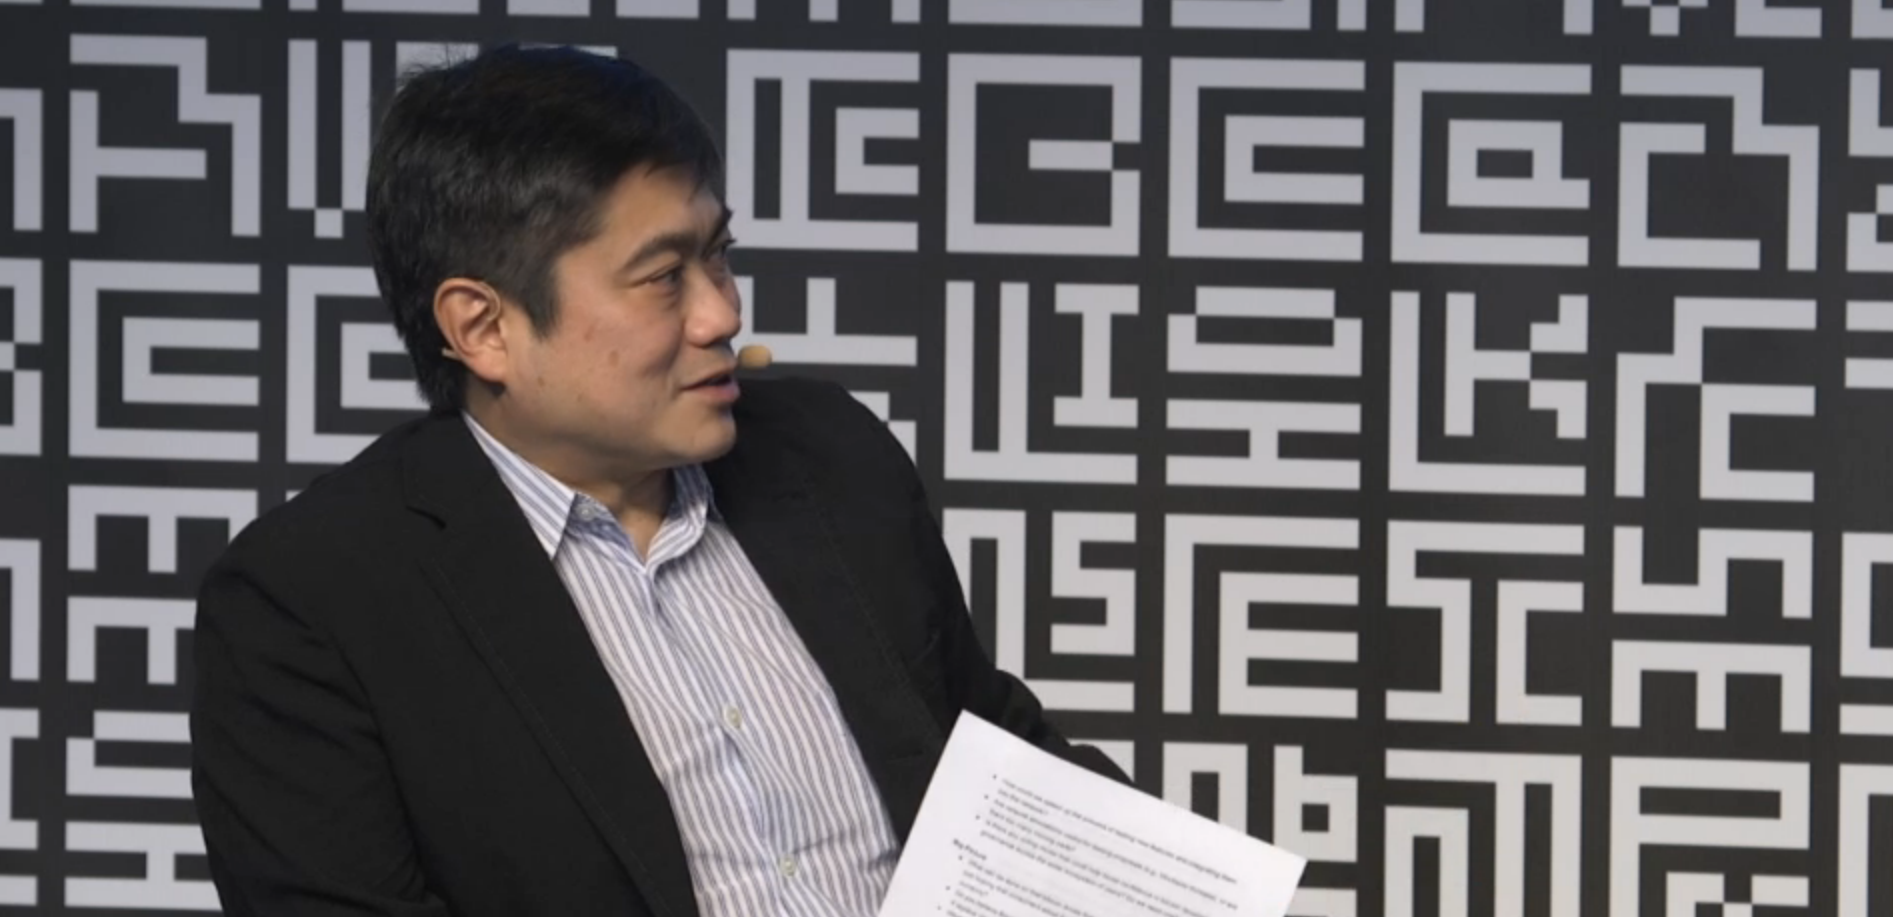 MIT Media Lab Director Joi Ito Steps Down Over Epstein Financing